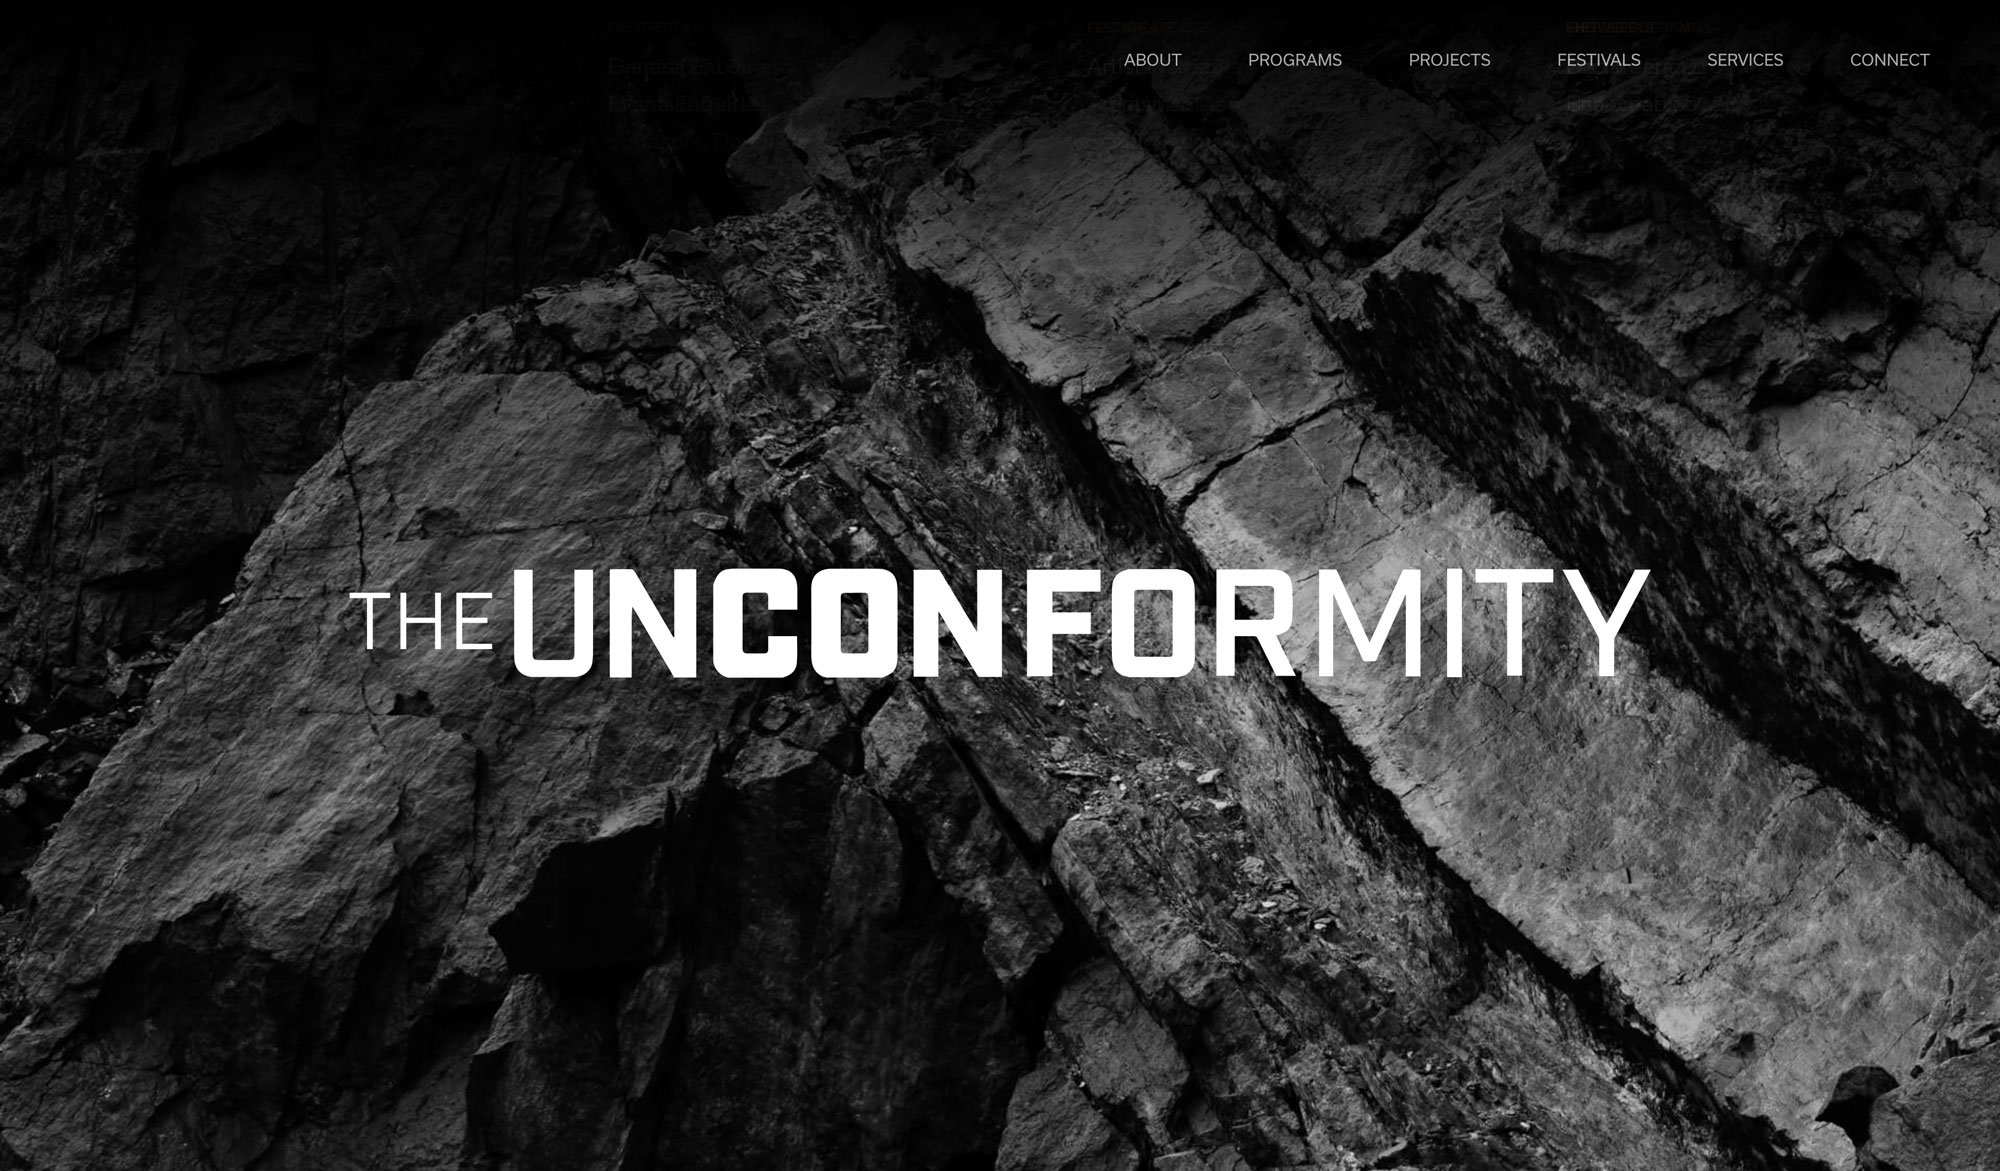 The Unconformity website, project and festival microsites